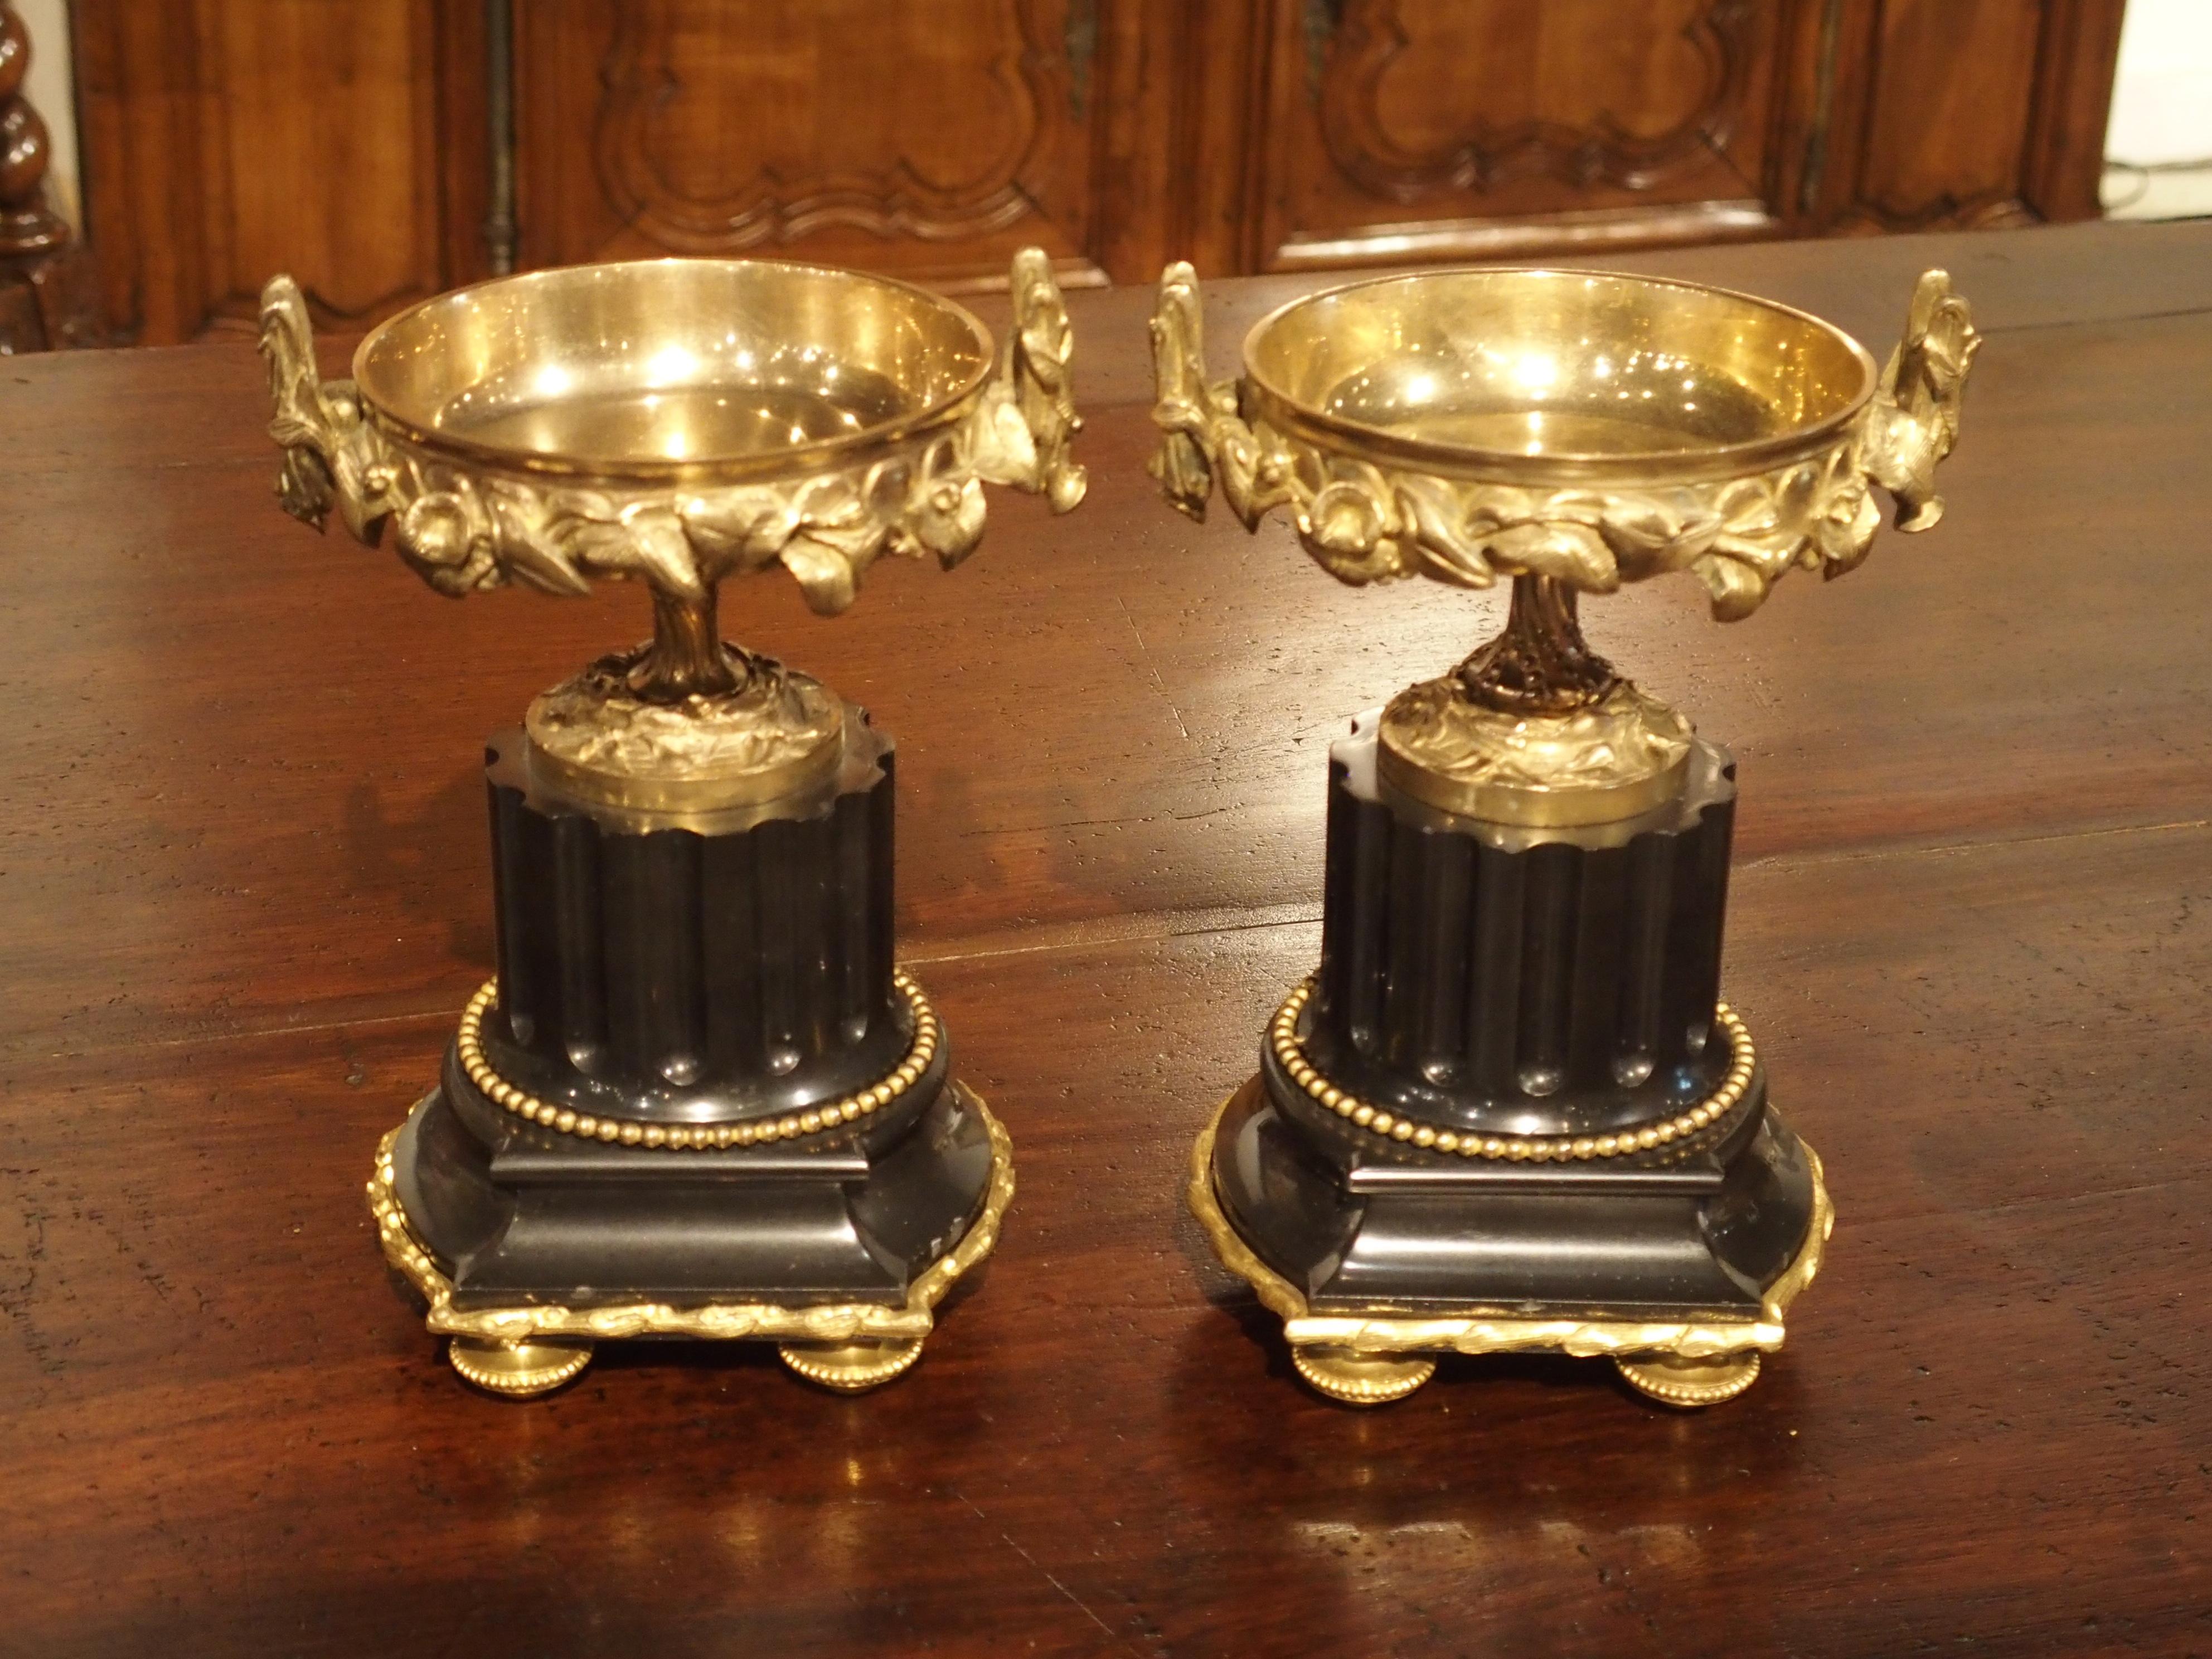 Neoclassical Pair of Antique Marble and Gilt Bronze Tazzas from France, circa 1870